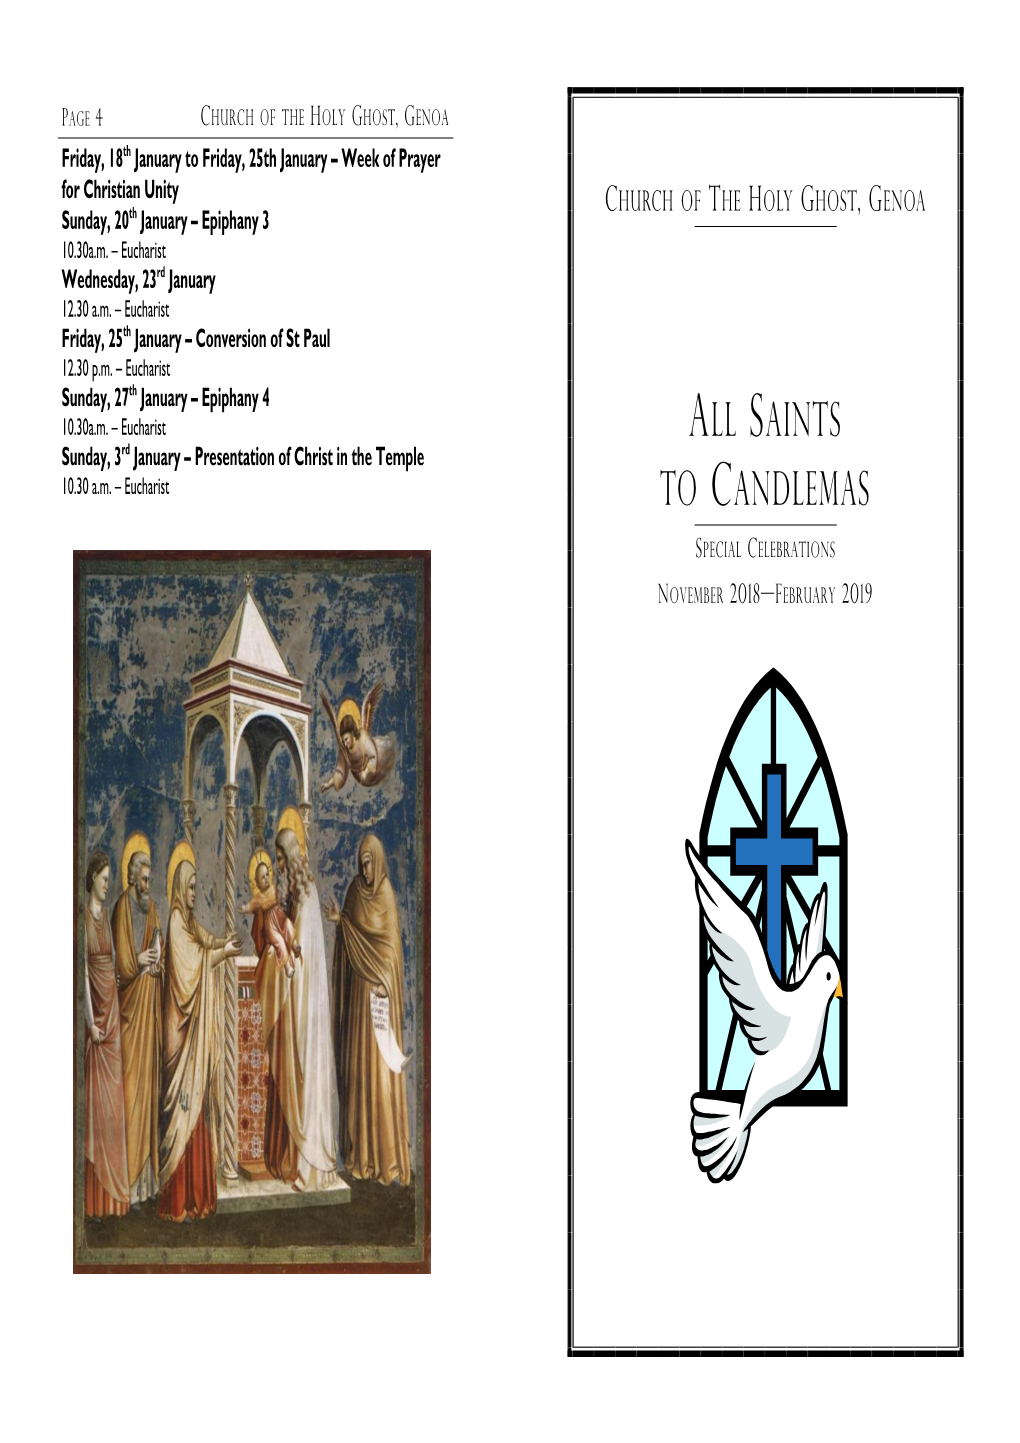 All Saints to Candlemas